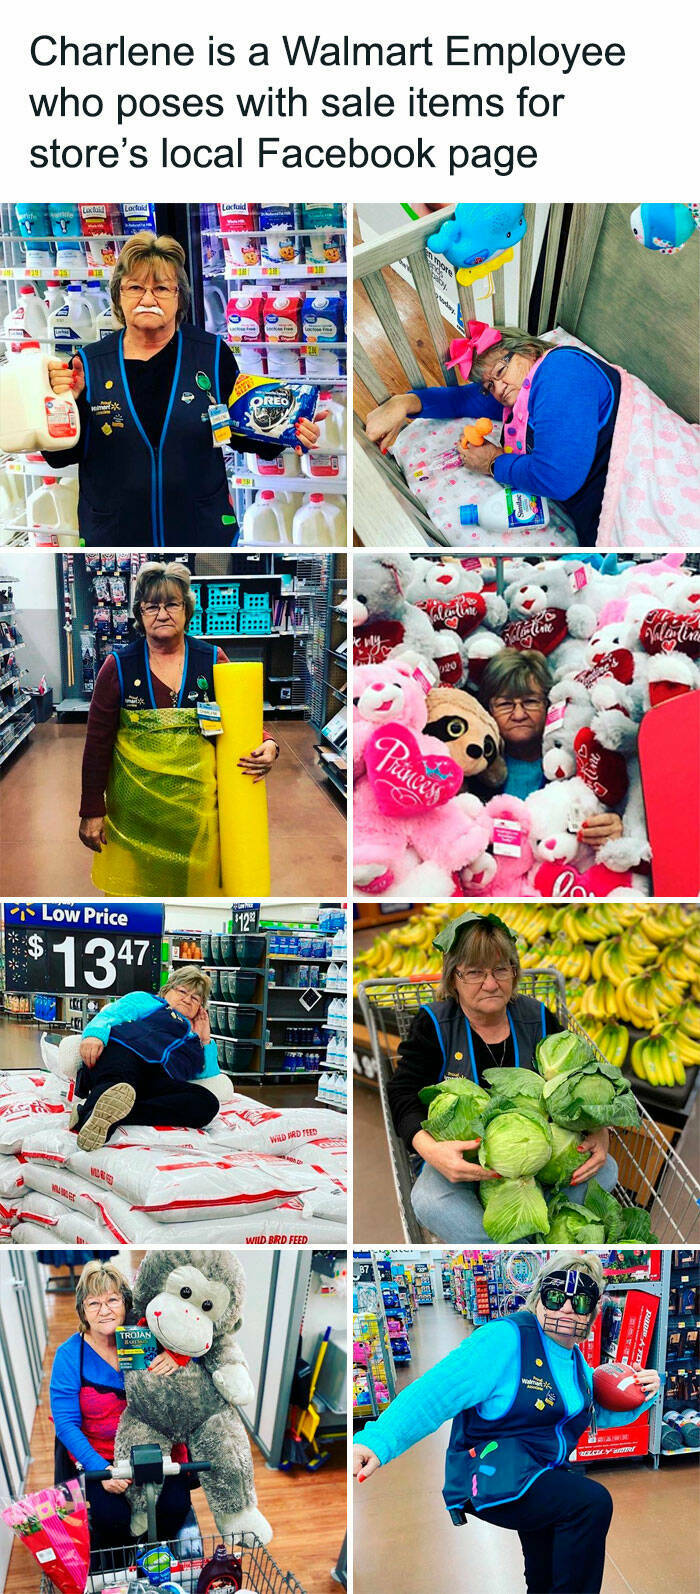 People of Walmart - Charlene is a Walmart Employee who poses with sale items for store's local Facebook page Lex Loctud Lexfuld 21 11 } Se Oreo H...!!! Re vy Woodete es Princess Do Low Price '12 $ 1347 Ge 01 T66 Wd Wd Te Vale Wild Brd Feed 7 Troian Wait